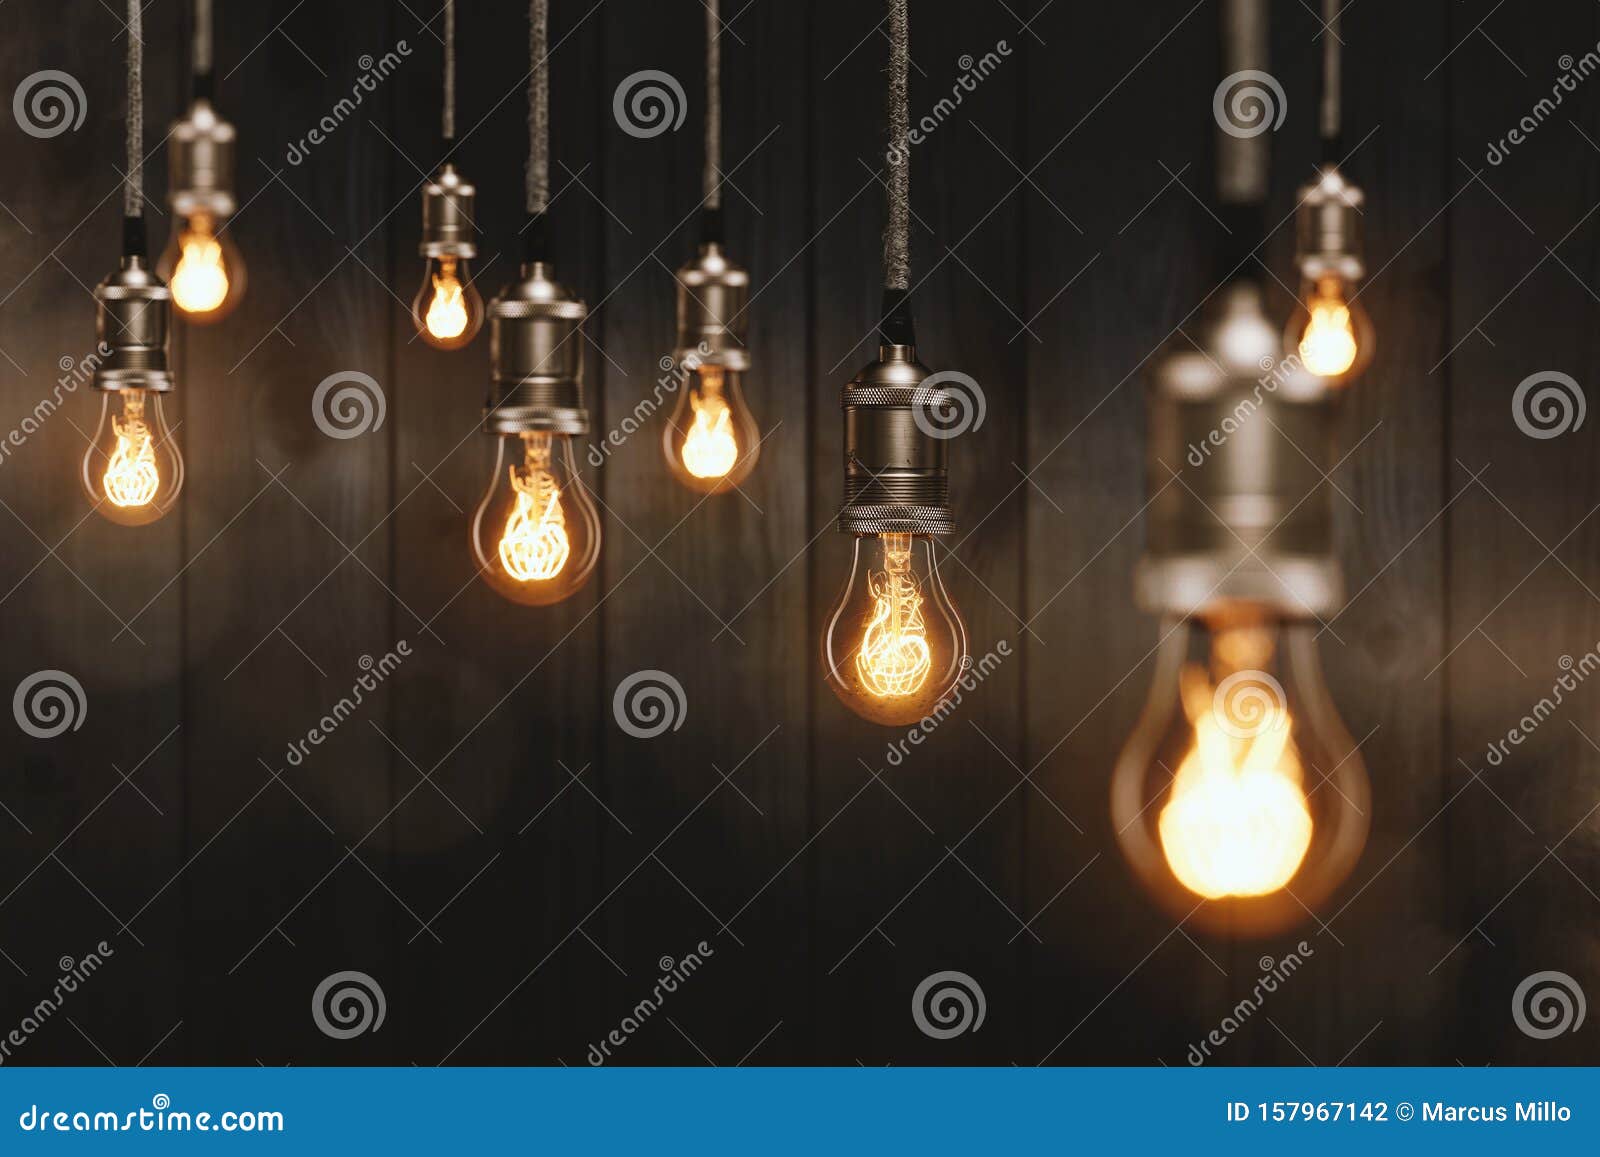 edison light bulbs in front of a wooden wall